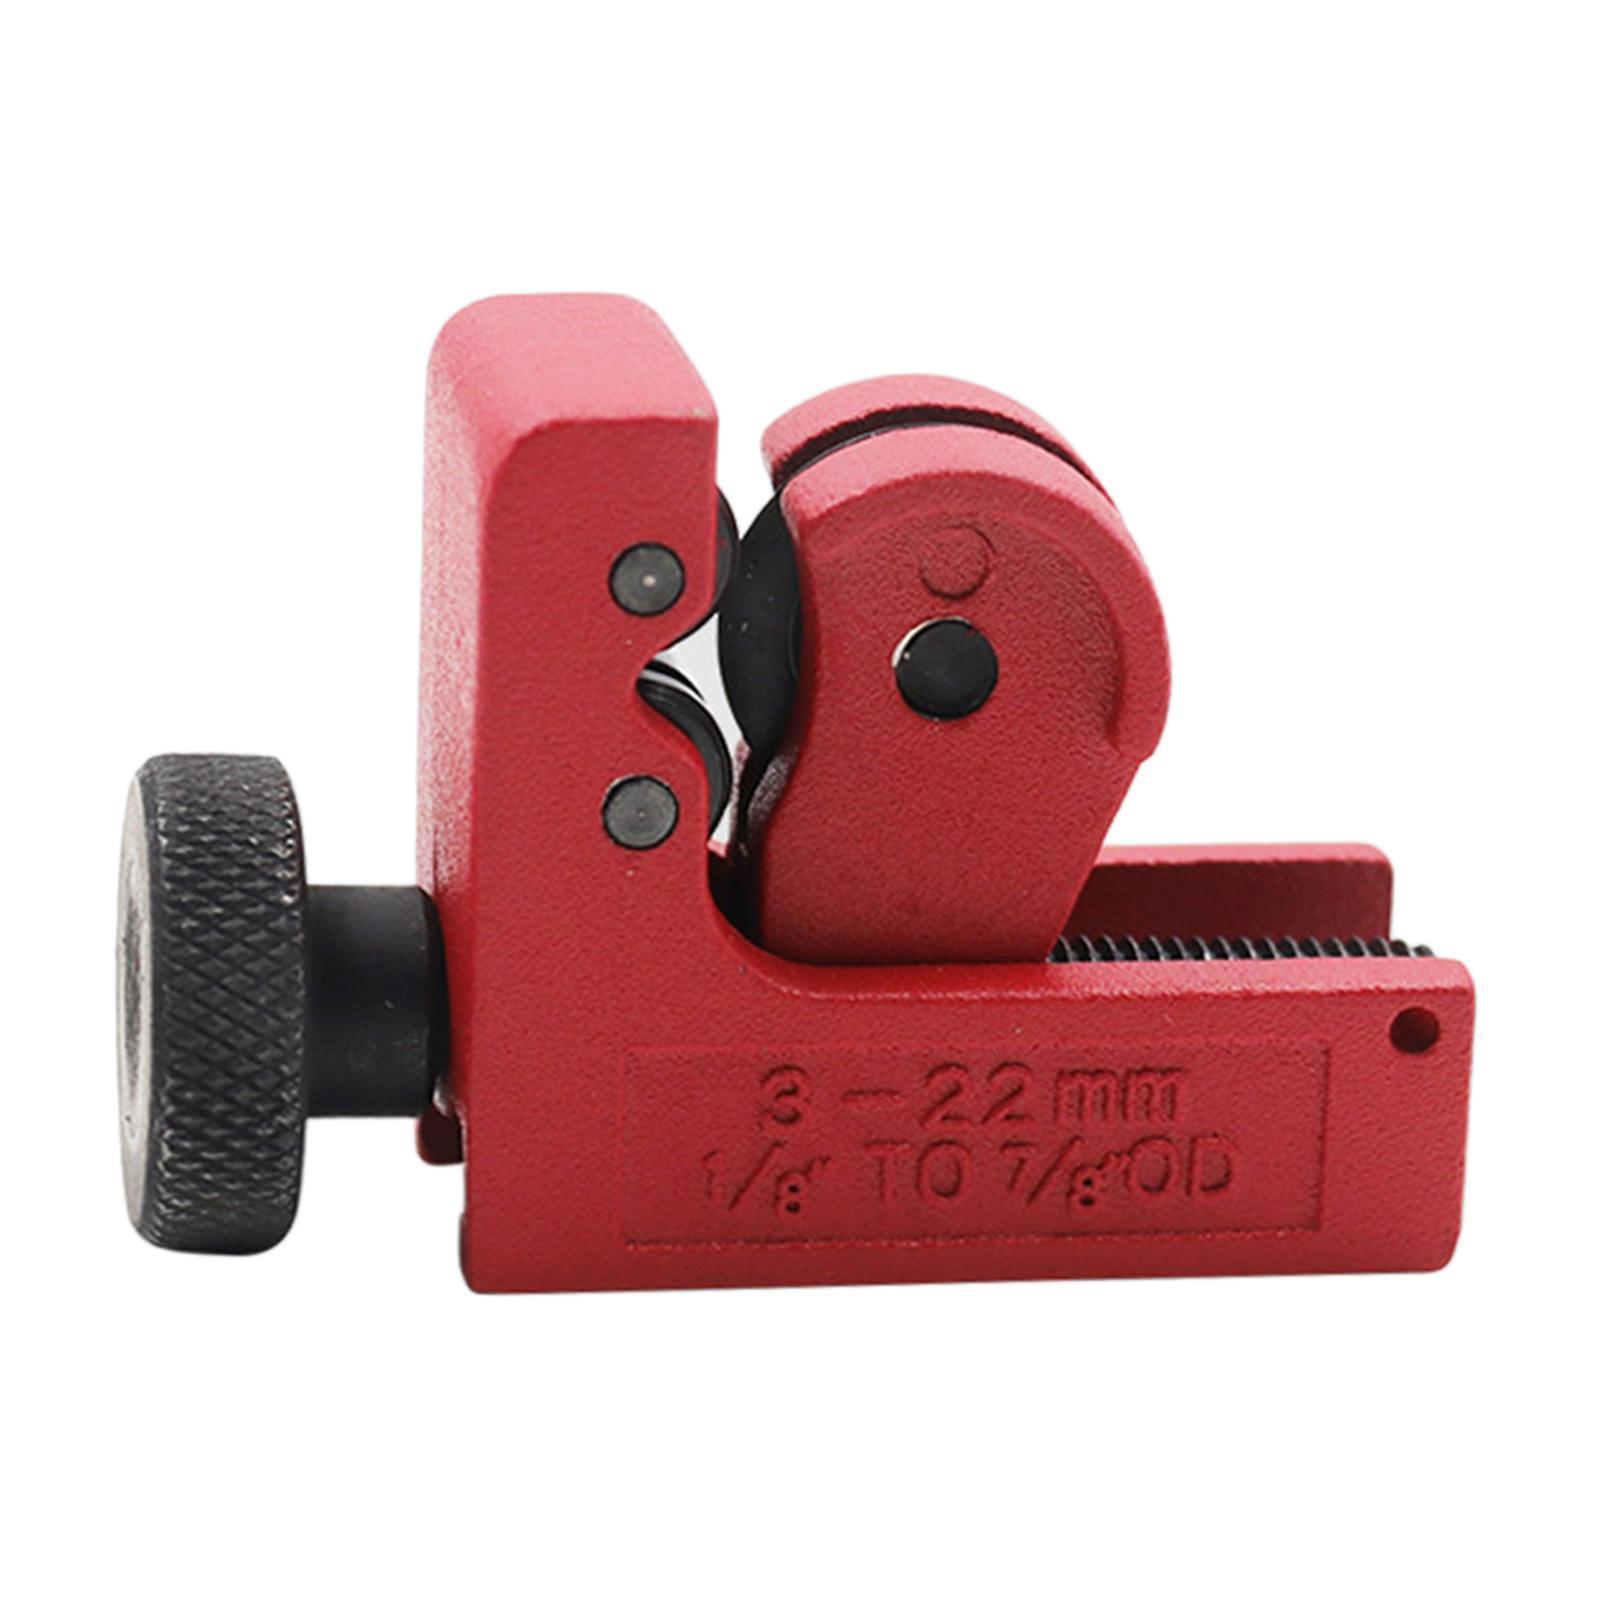 Pipe Cutter Replaces Mini Tubing Cutter for Copper Pipe Stainless Steel Pipe